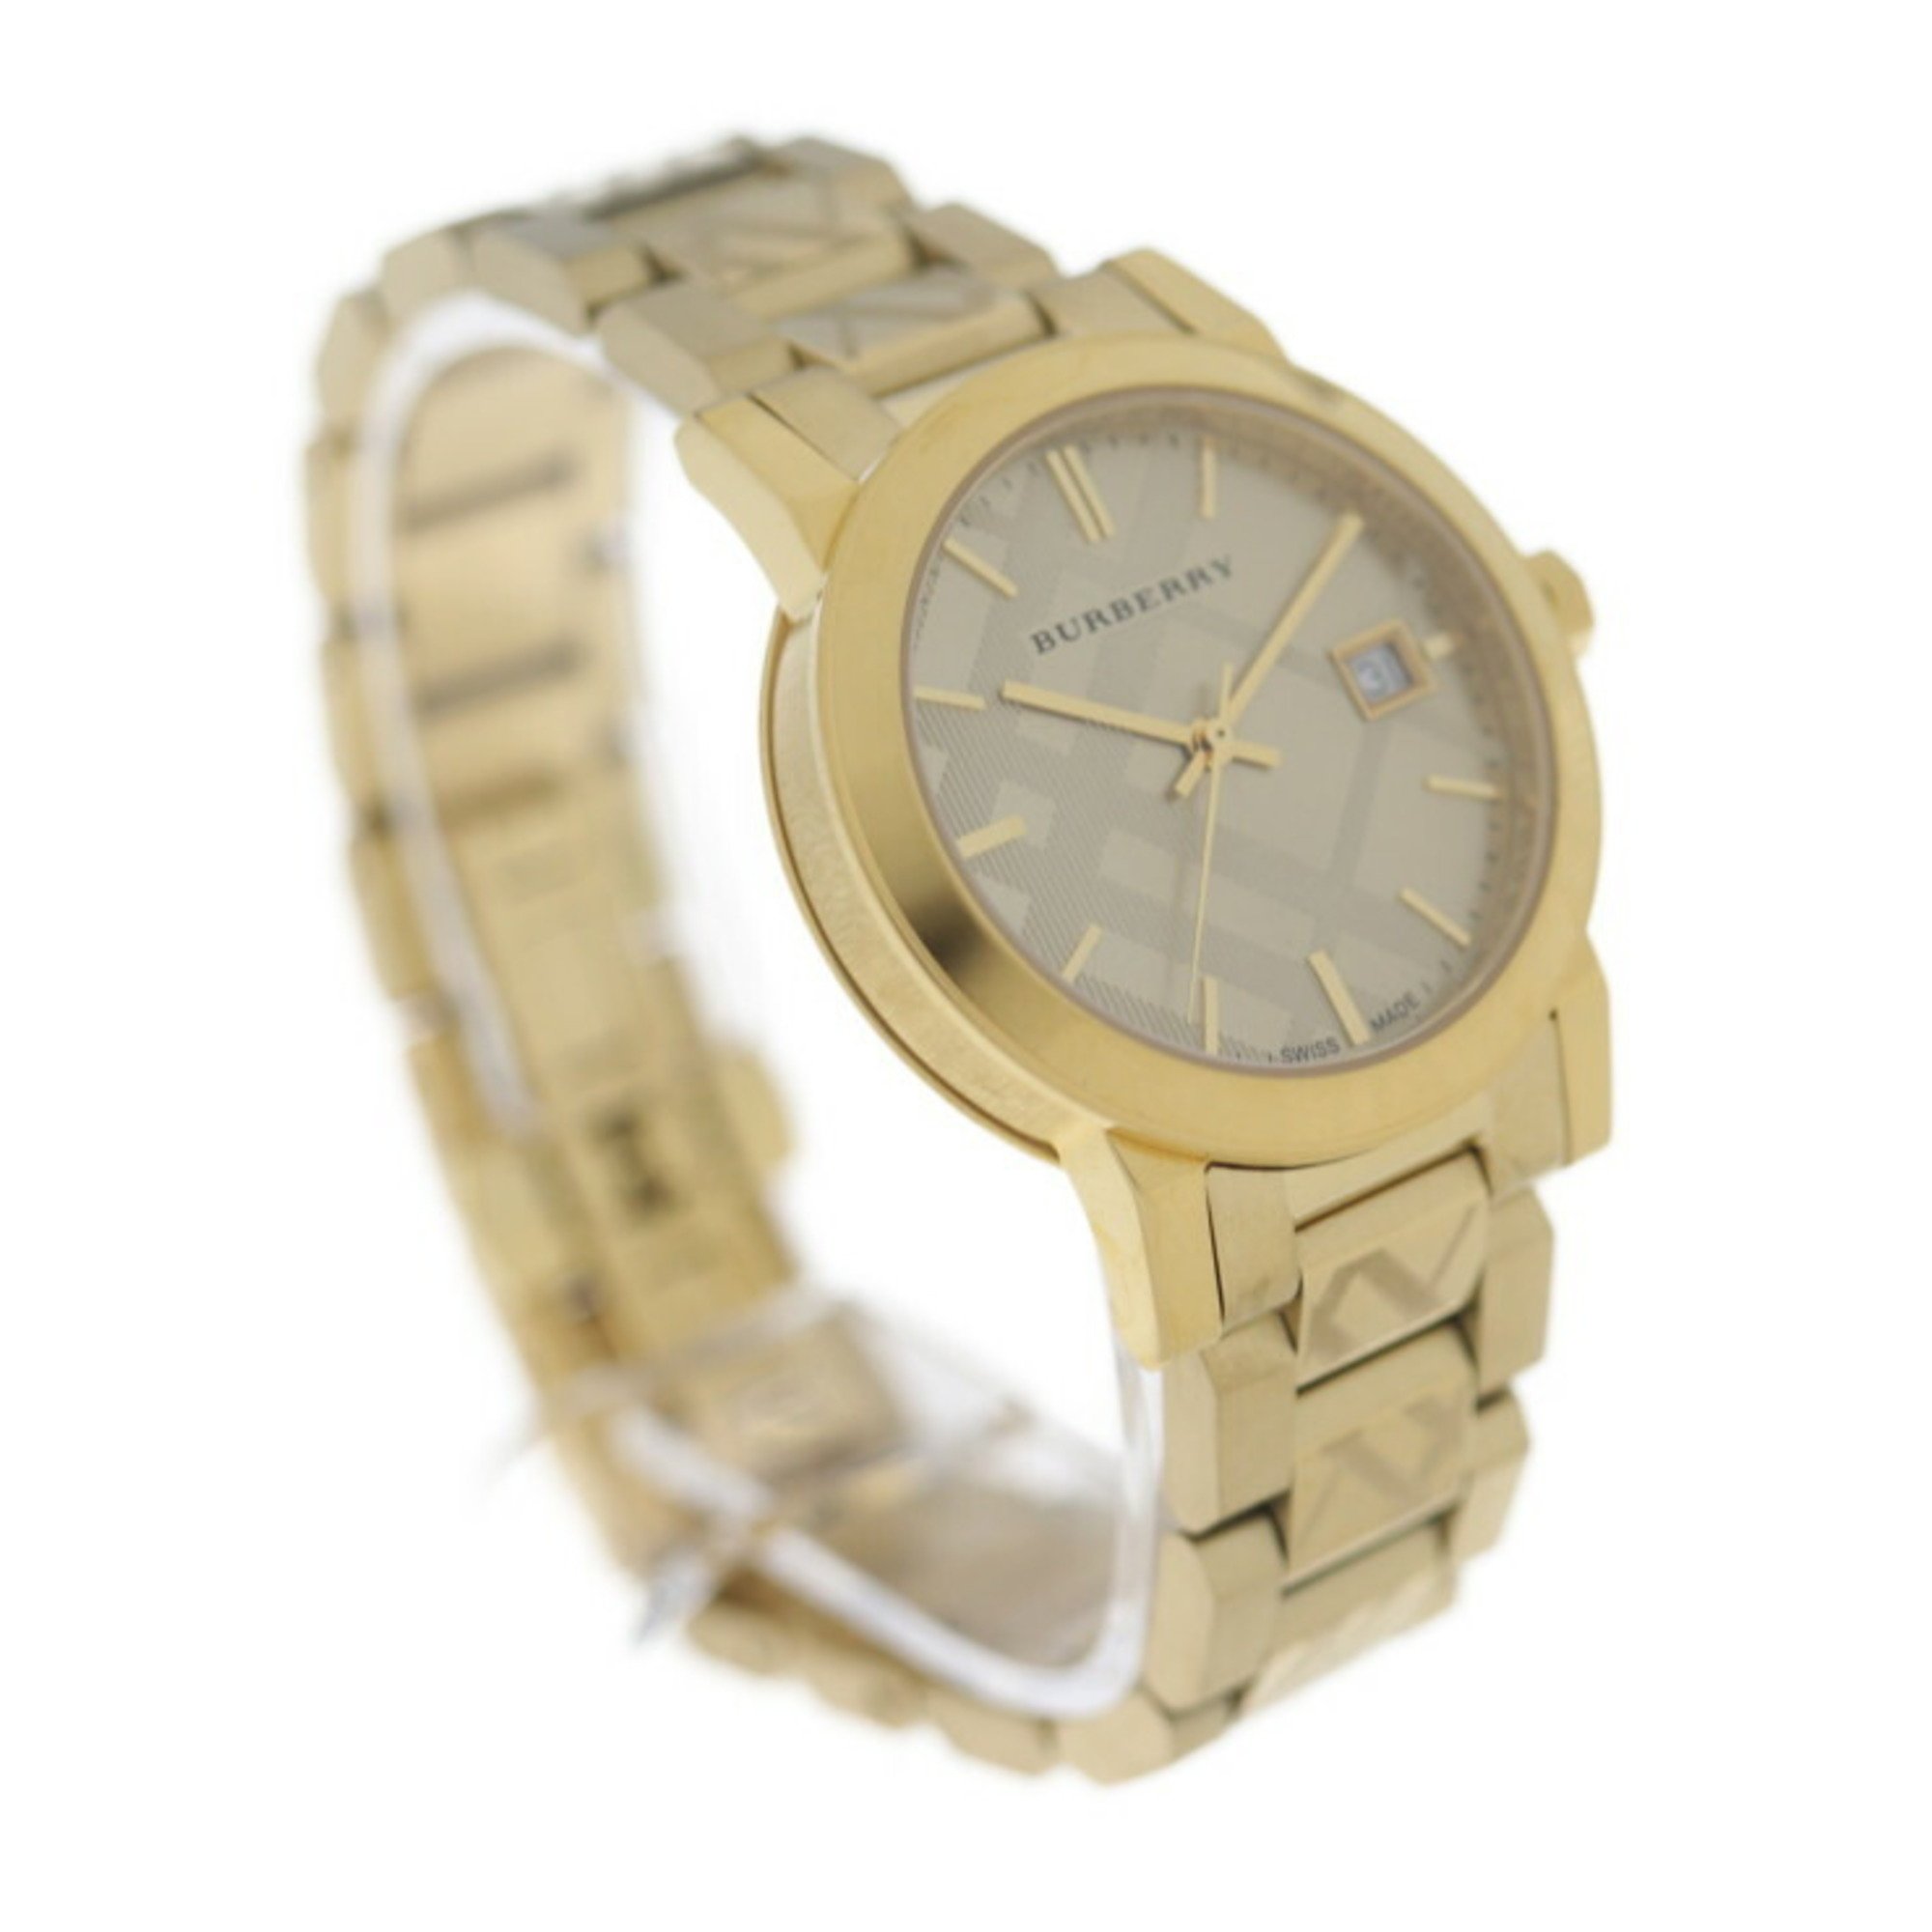 BURBERRY Burberry THE CITY watch BU9145 stainless steel gold